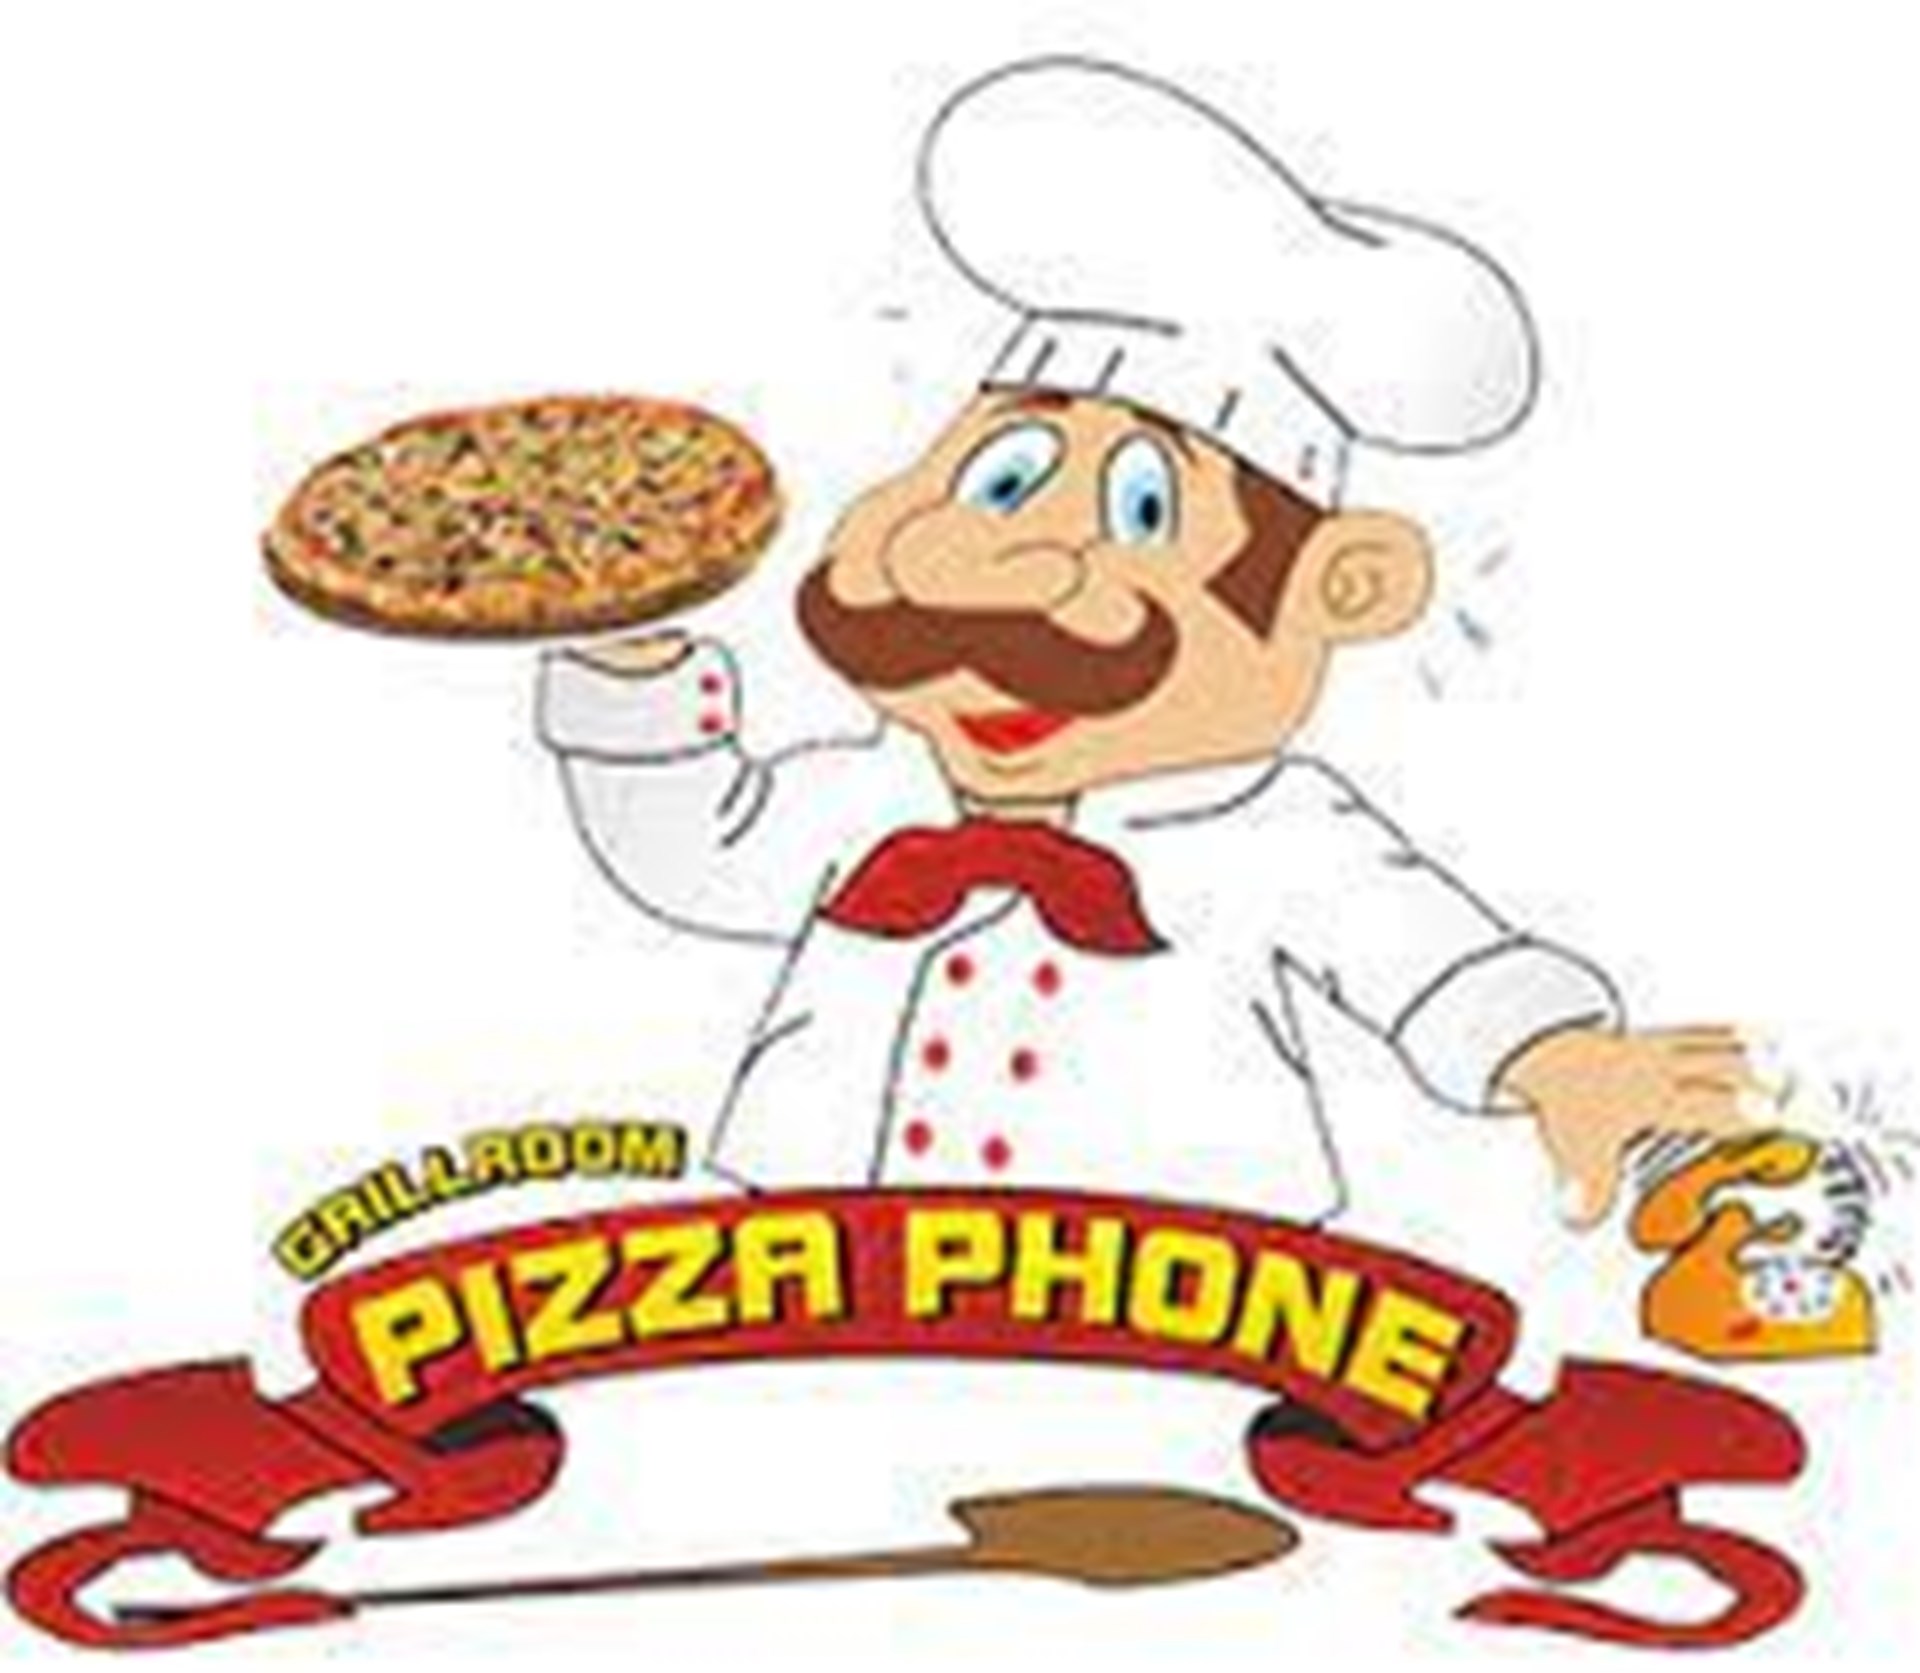 Grillroom Pizza Phone banner